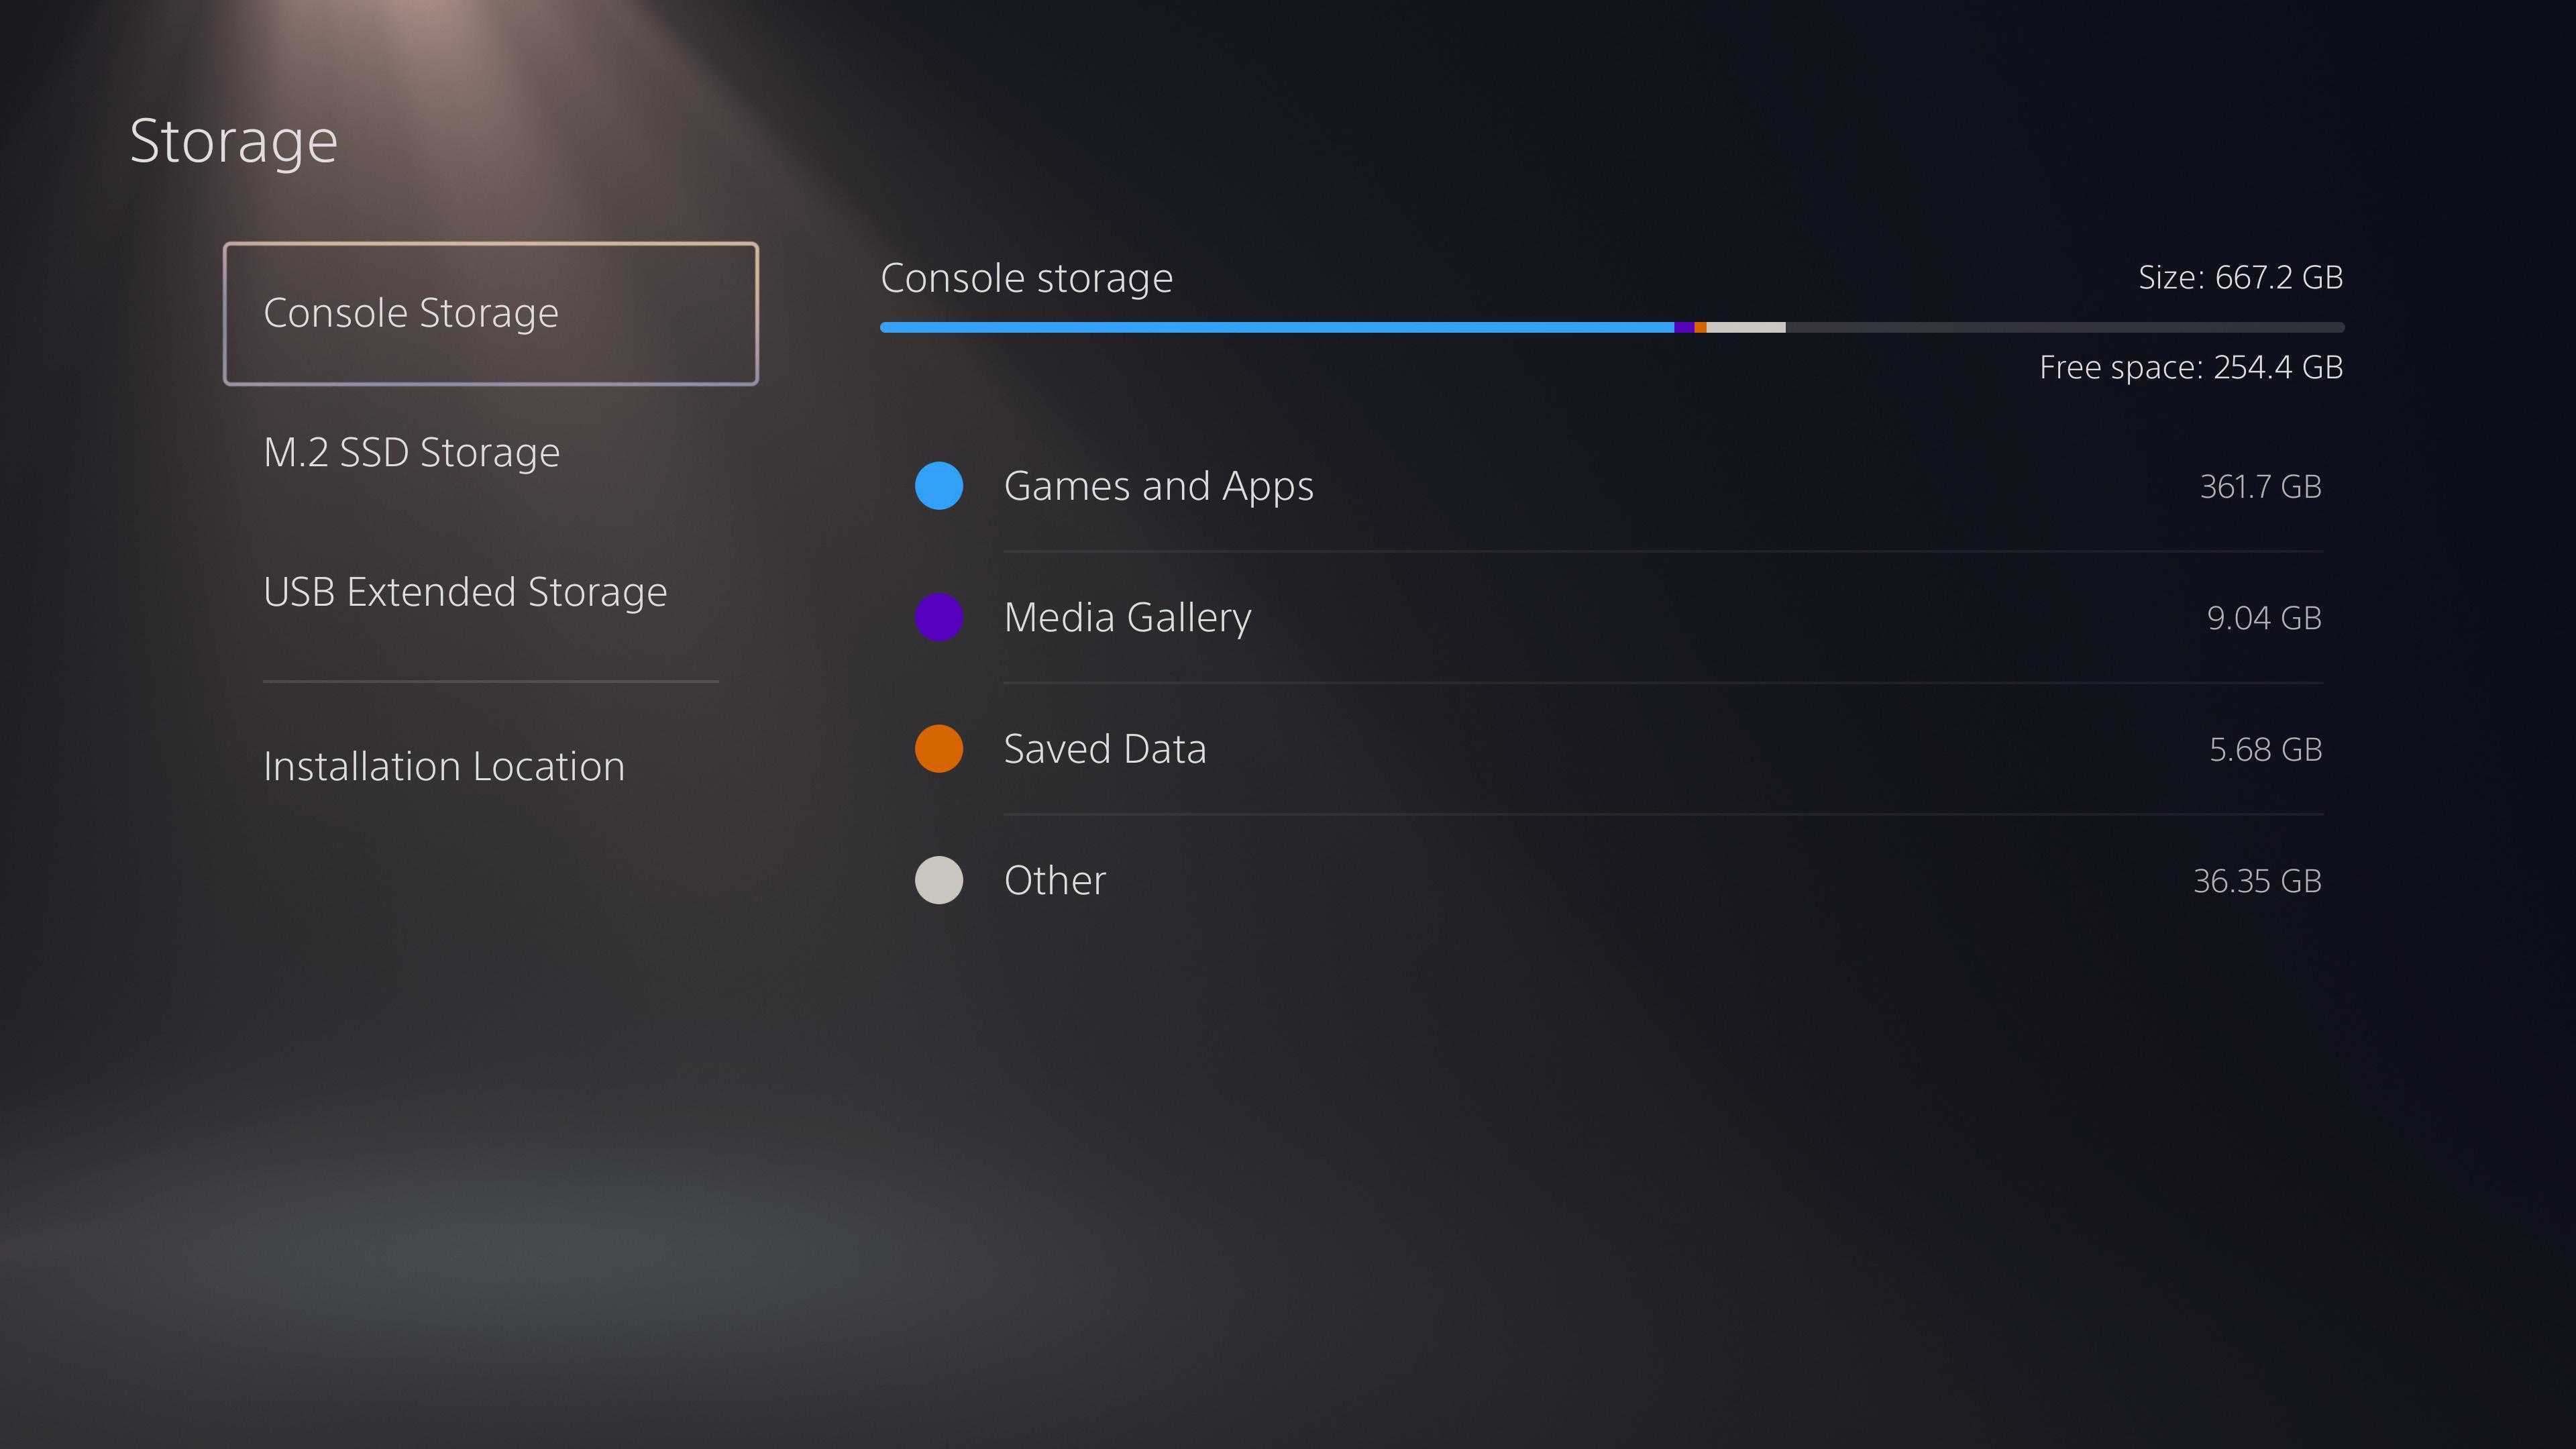 The storage settings menu of the PS5